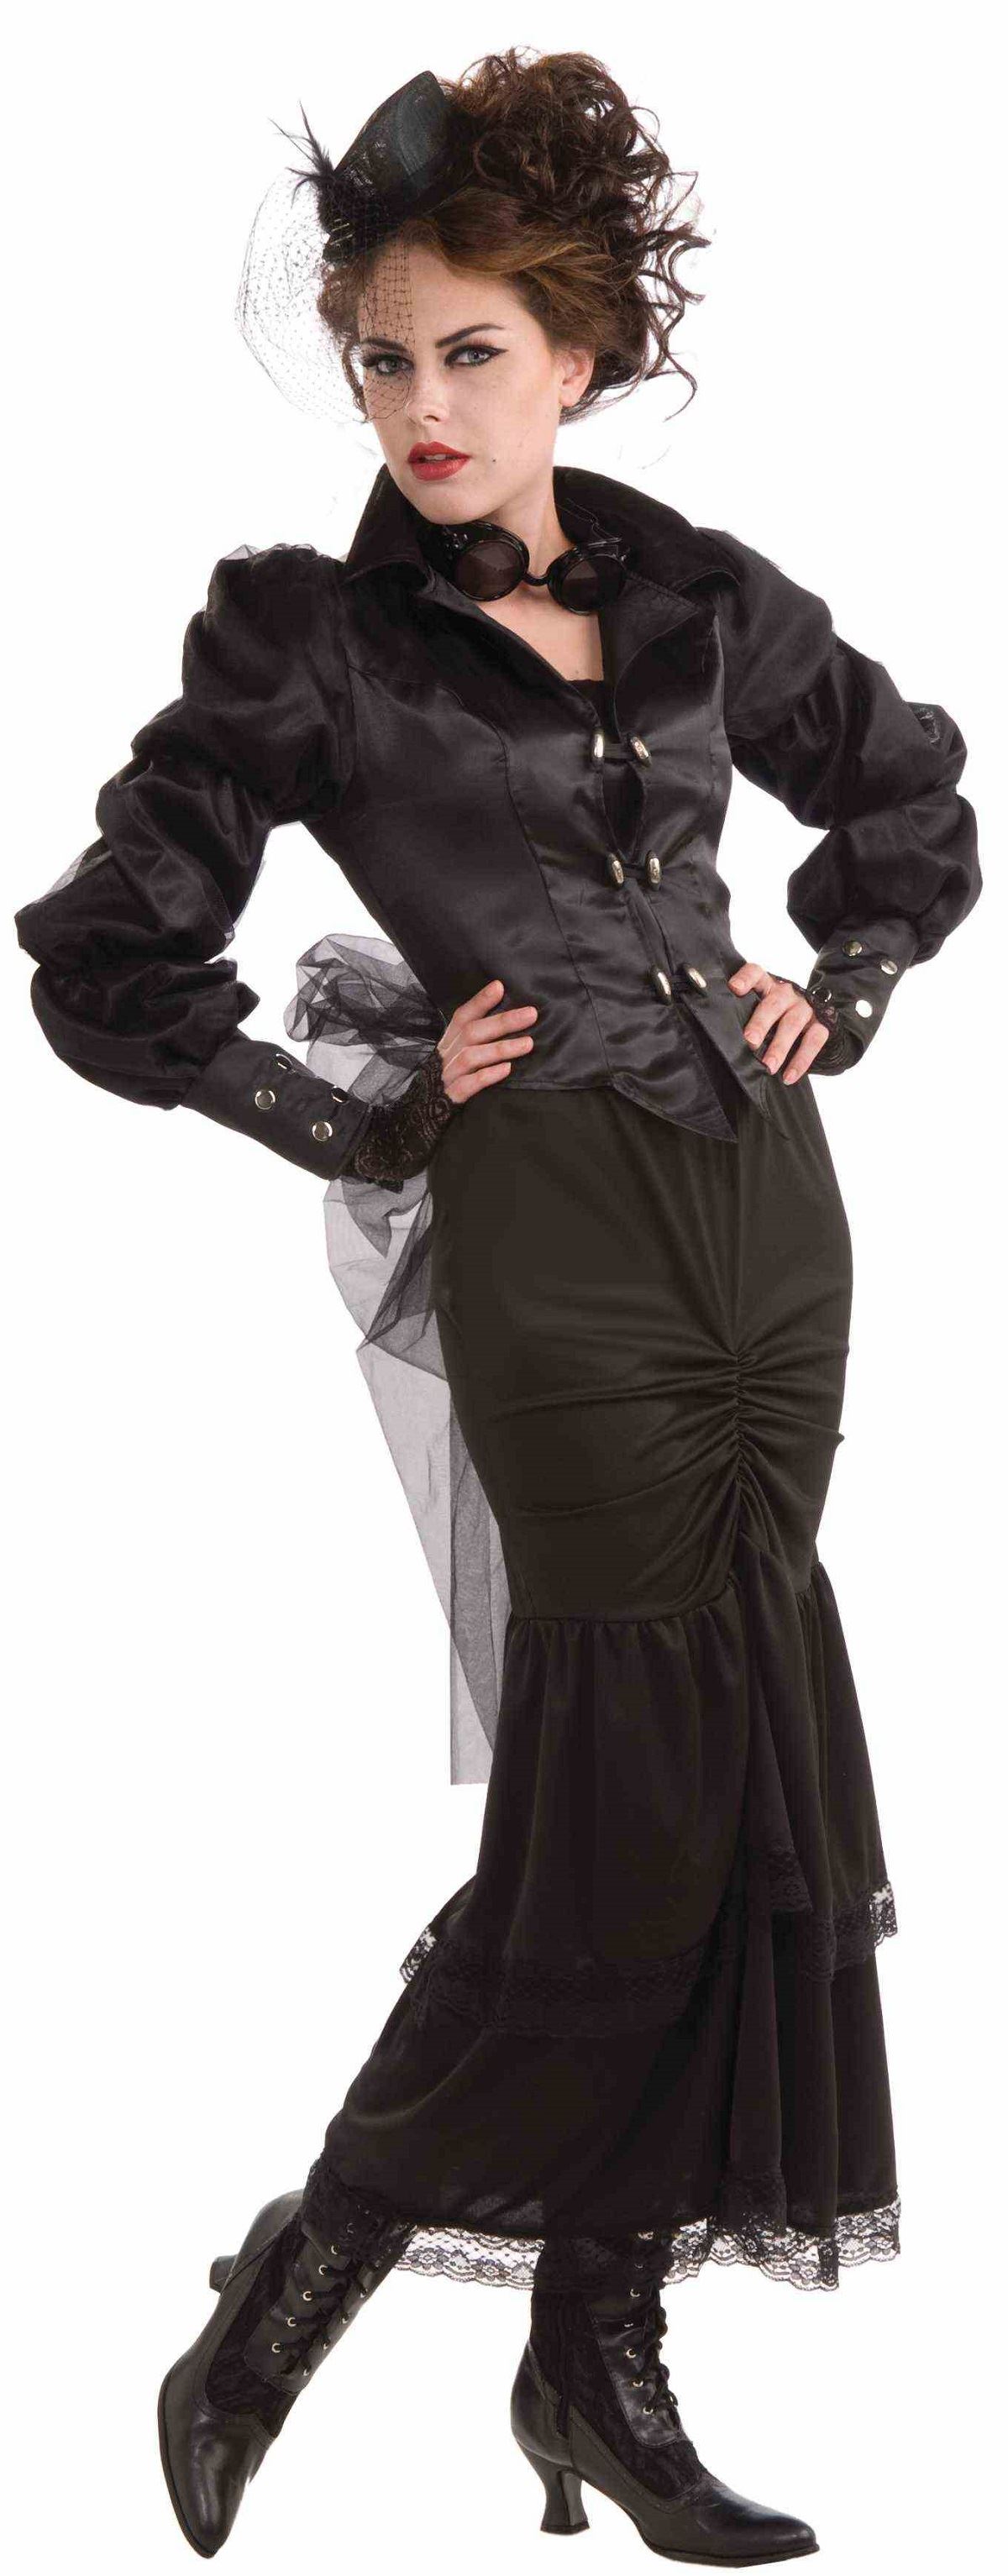 Adult Steampunk Victorian Lady Women Costume 3499 The Costume Land 